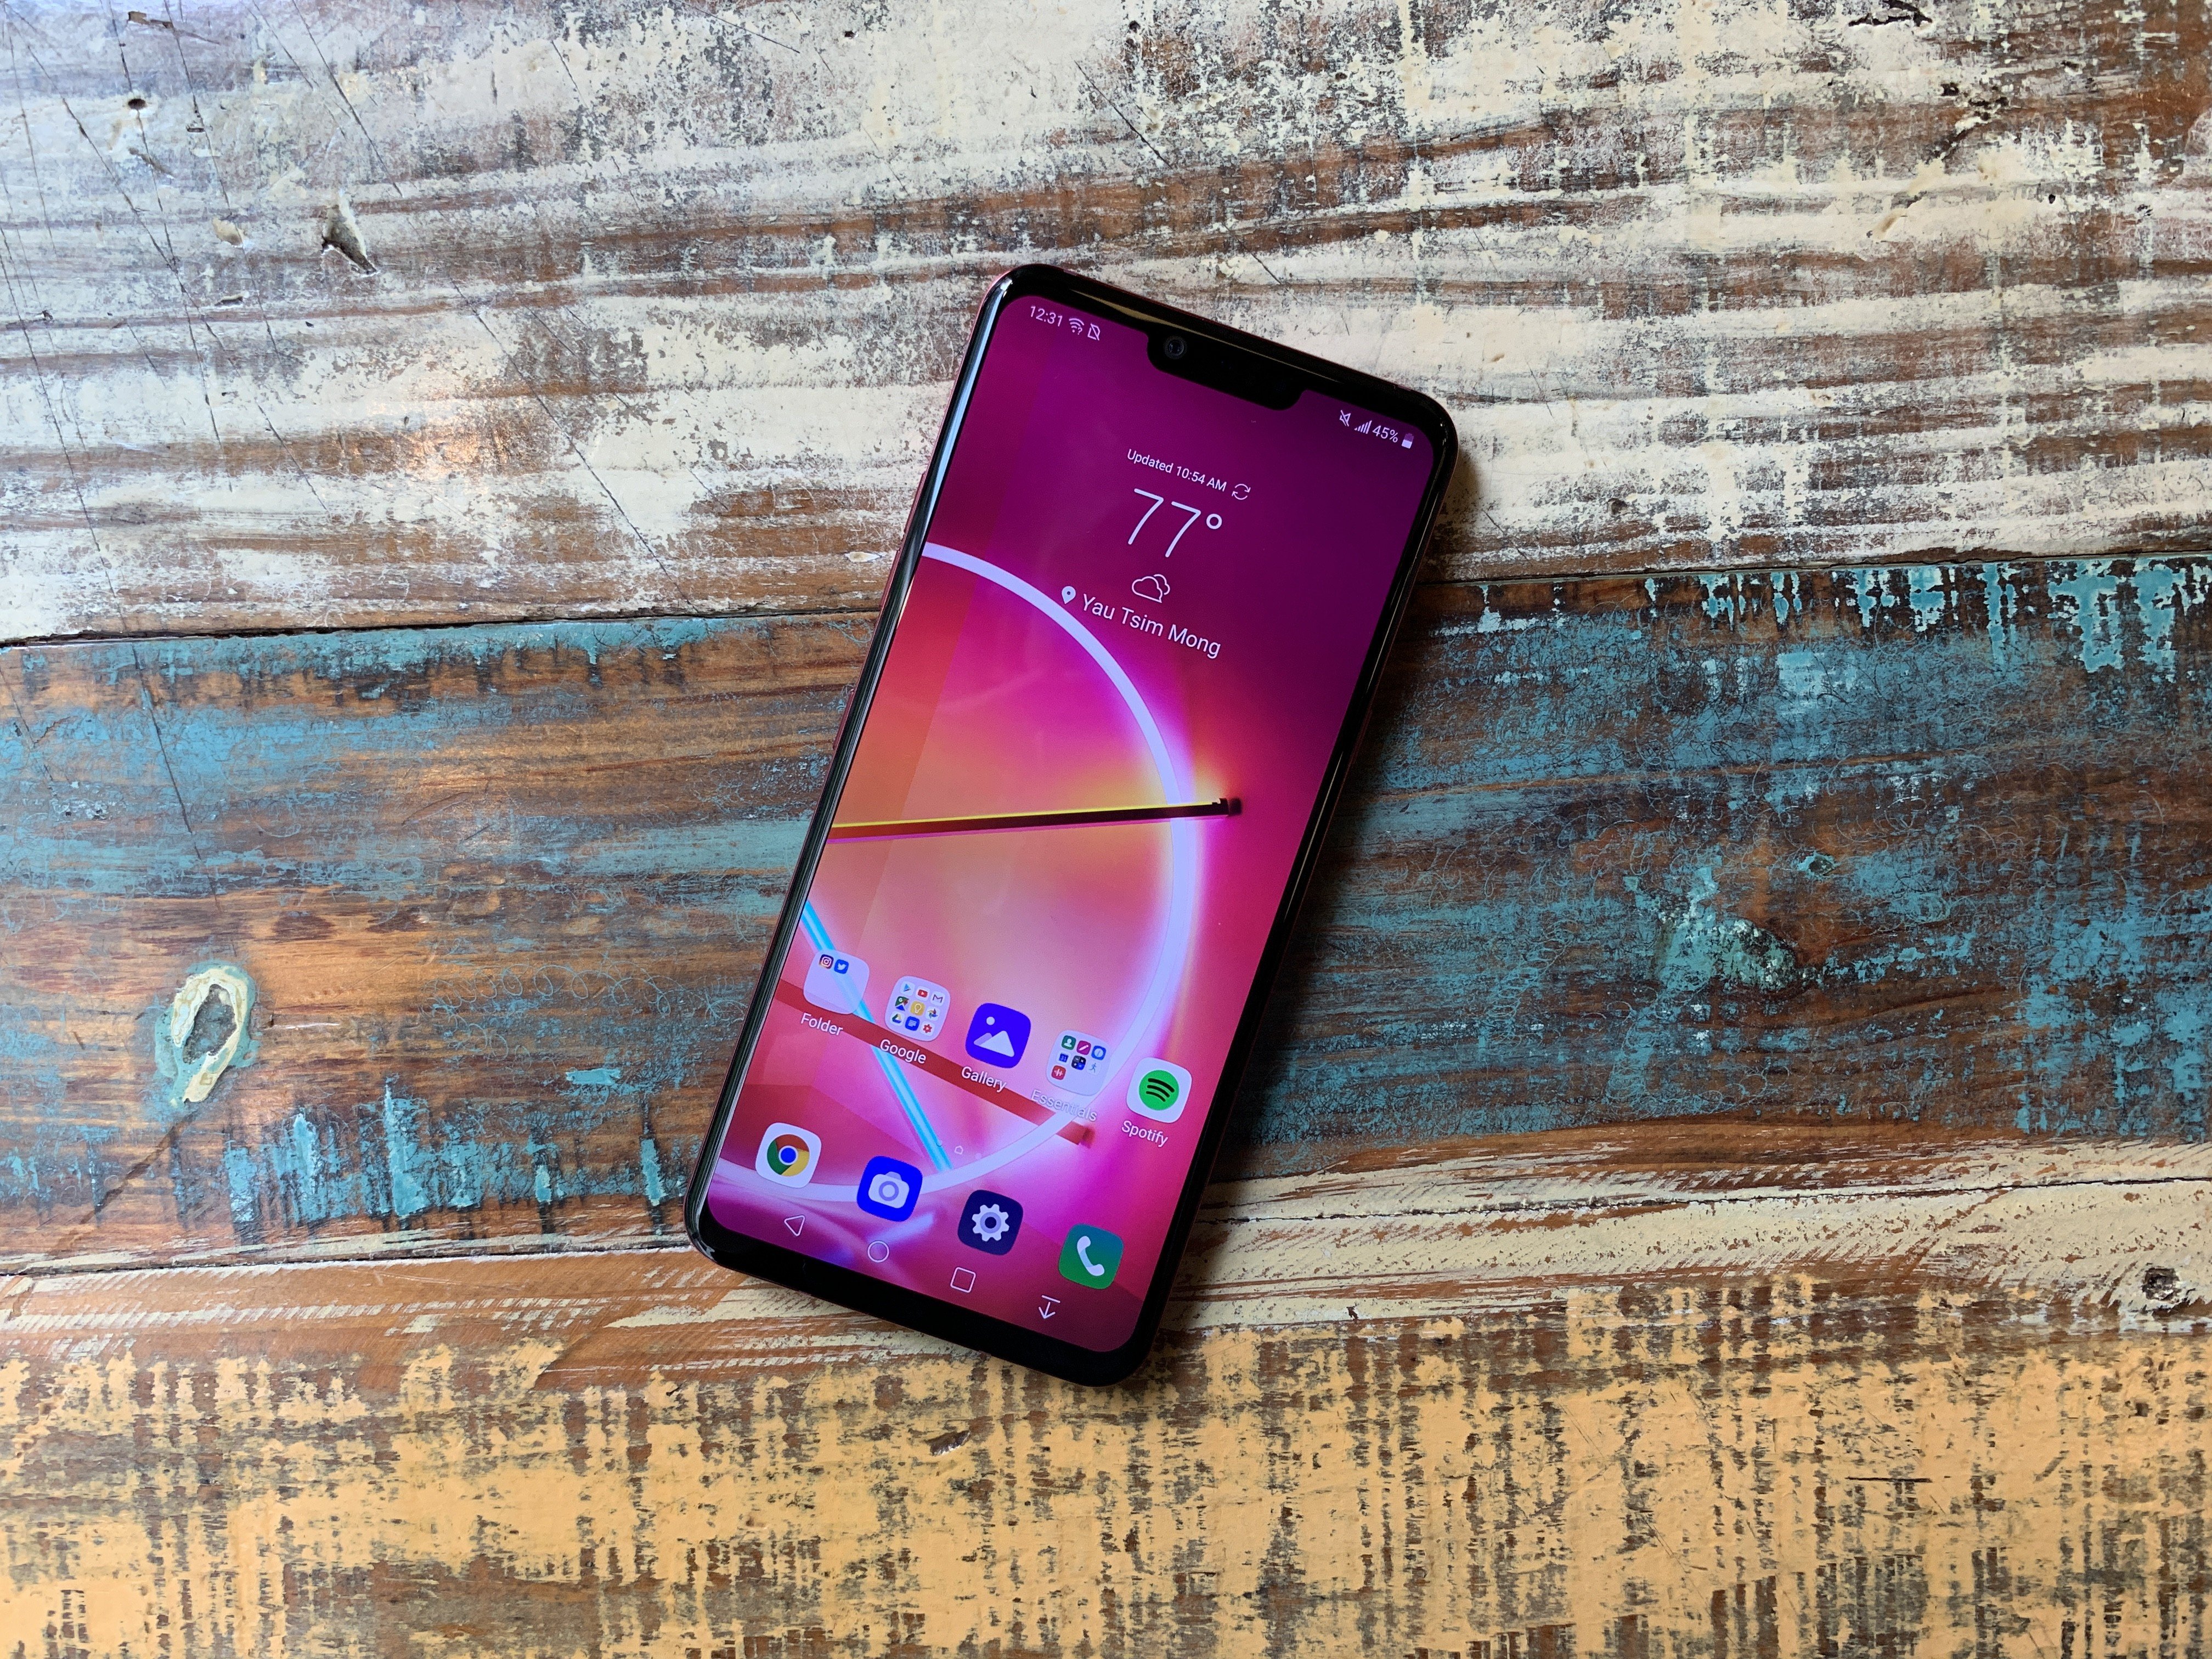 The LG G8 has a 6.1-inch OLED display, with all four sides of the display panel subtly curving towards the aluminium chassis. Photo: Ben Sin